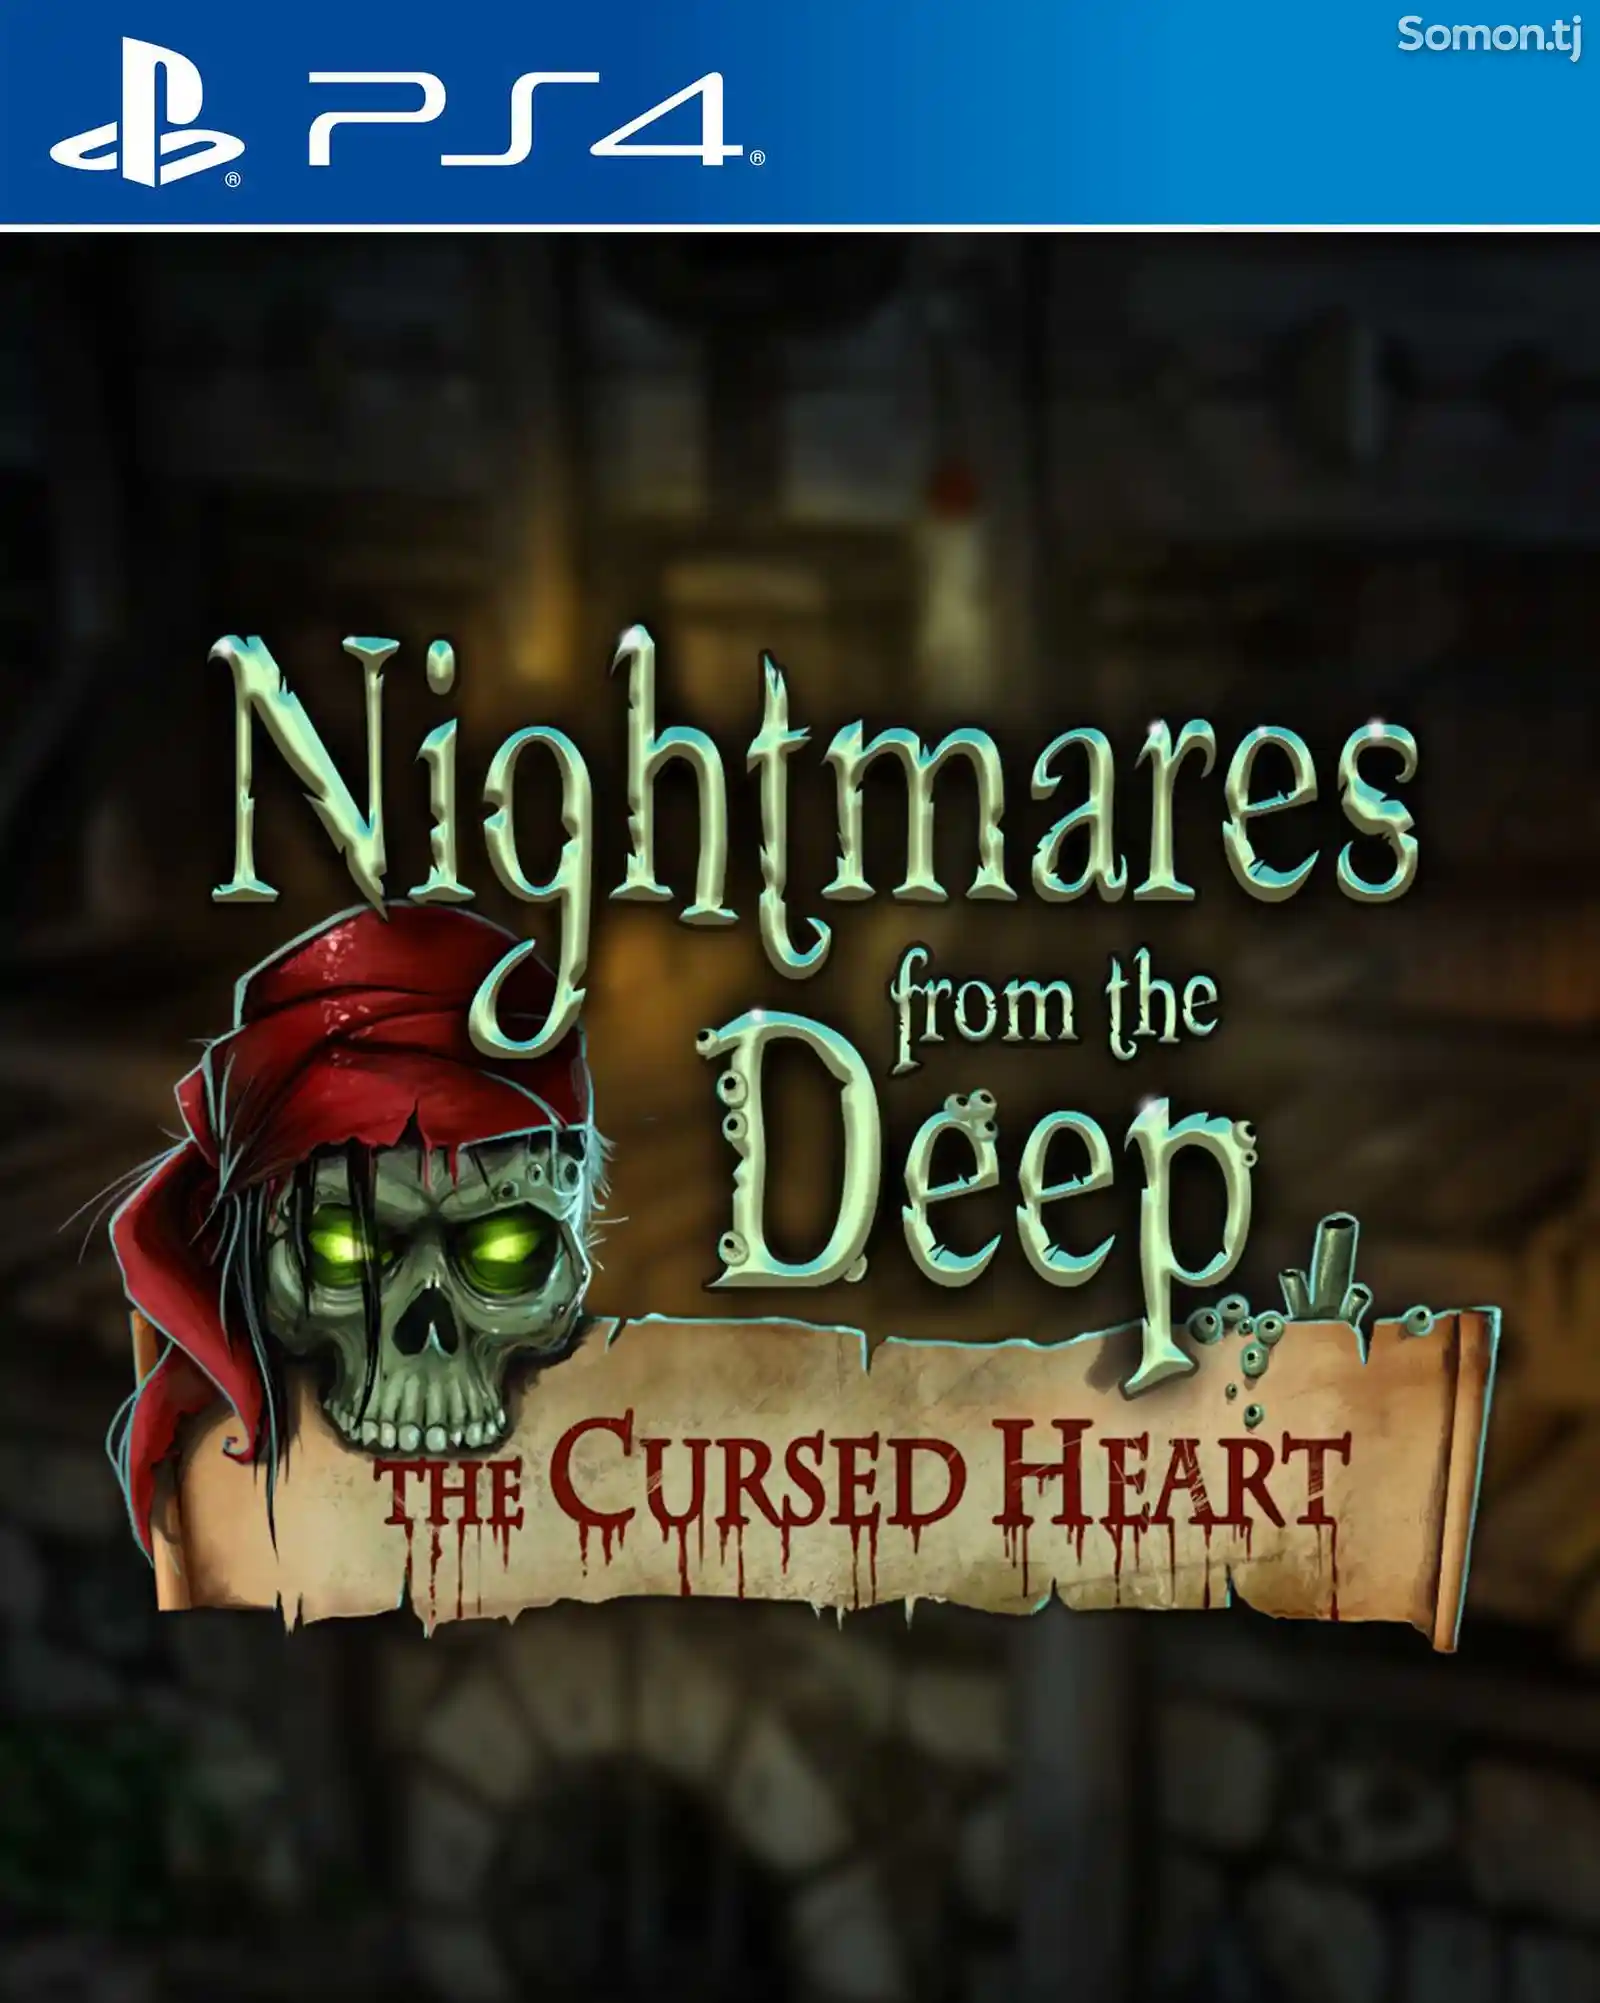 Игра Nightmares from the deep the cursed heart для PS-4 / 5.05 / 6.72 / 9.00 /-1